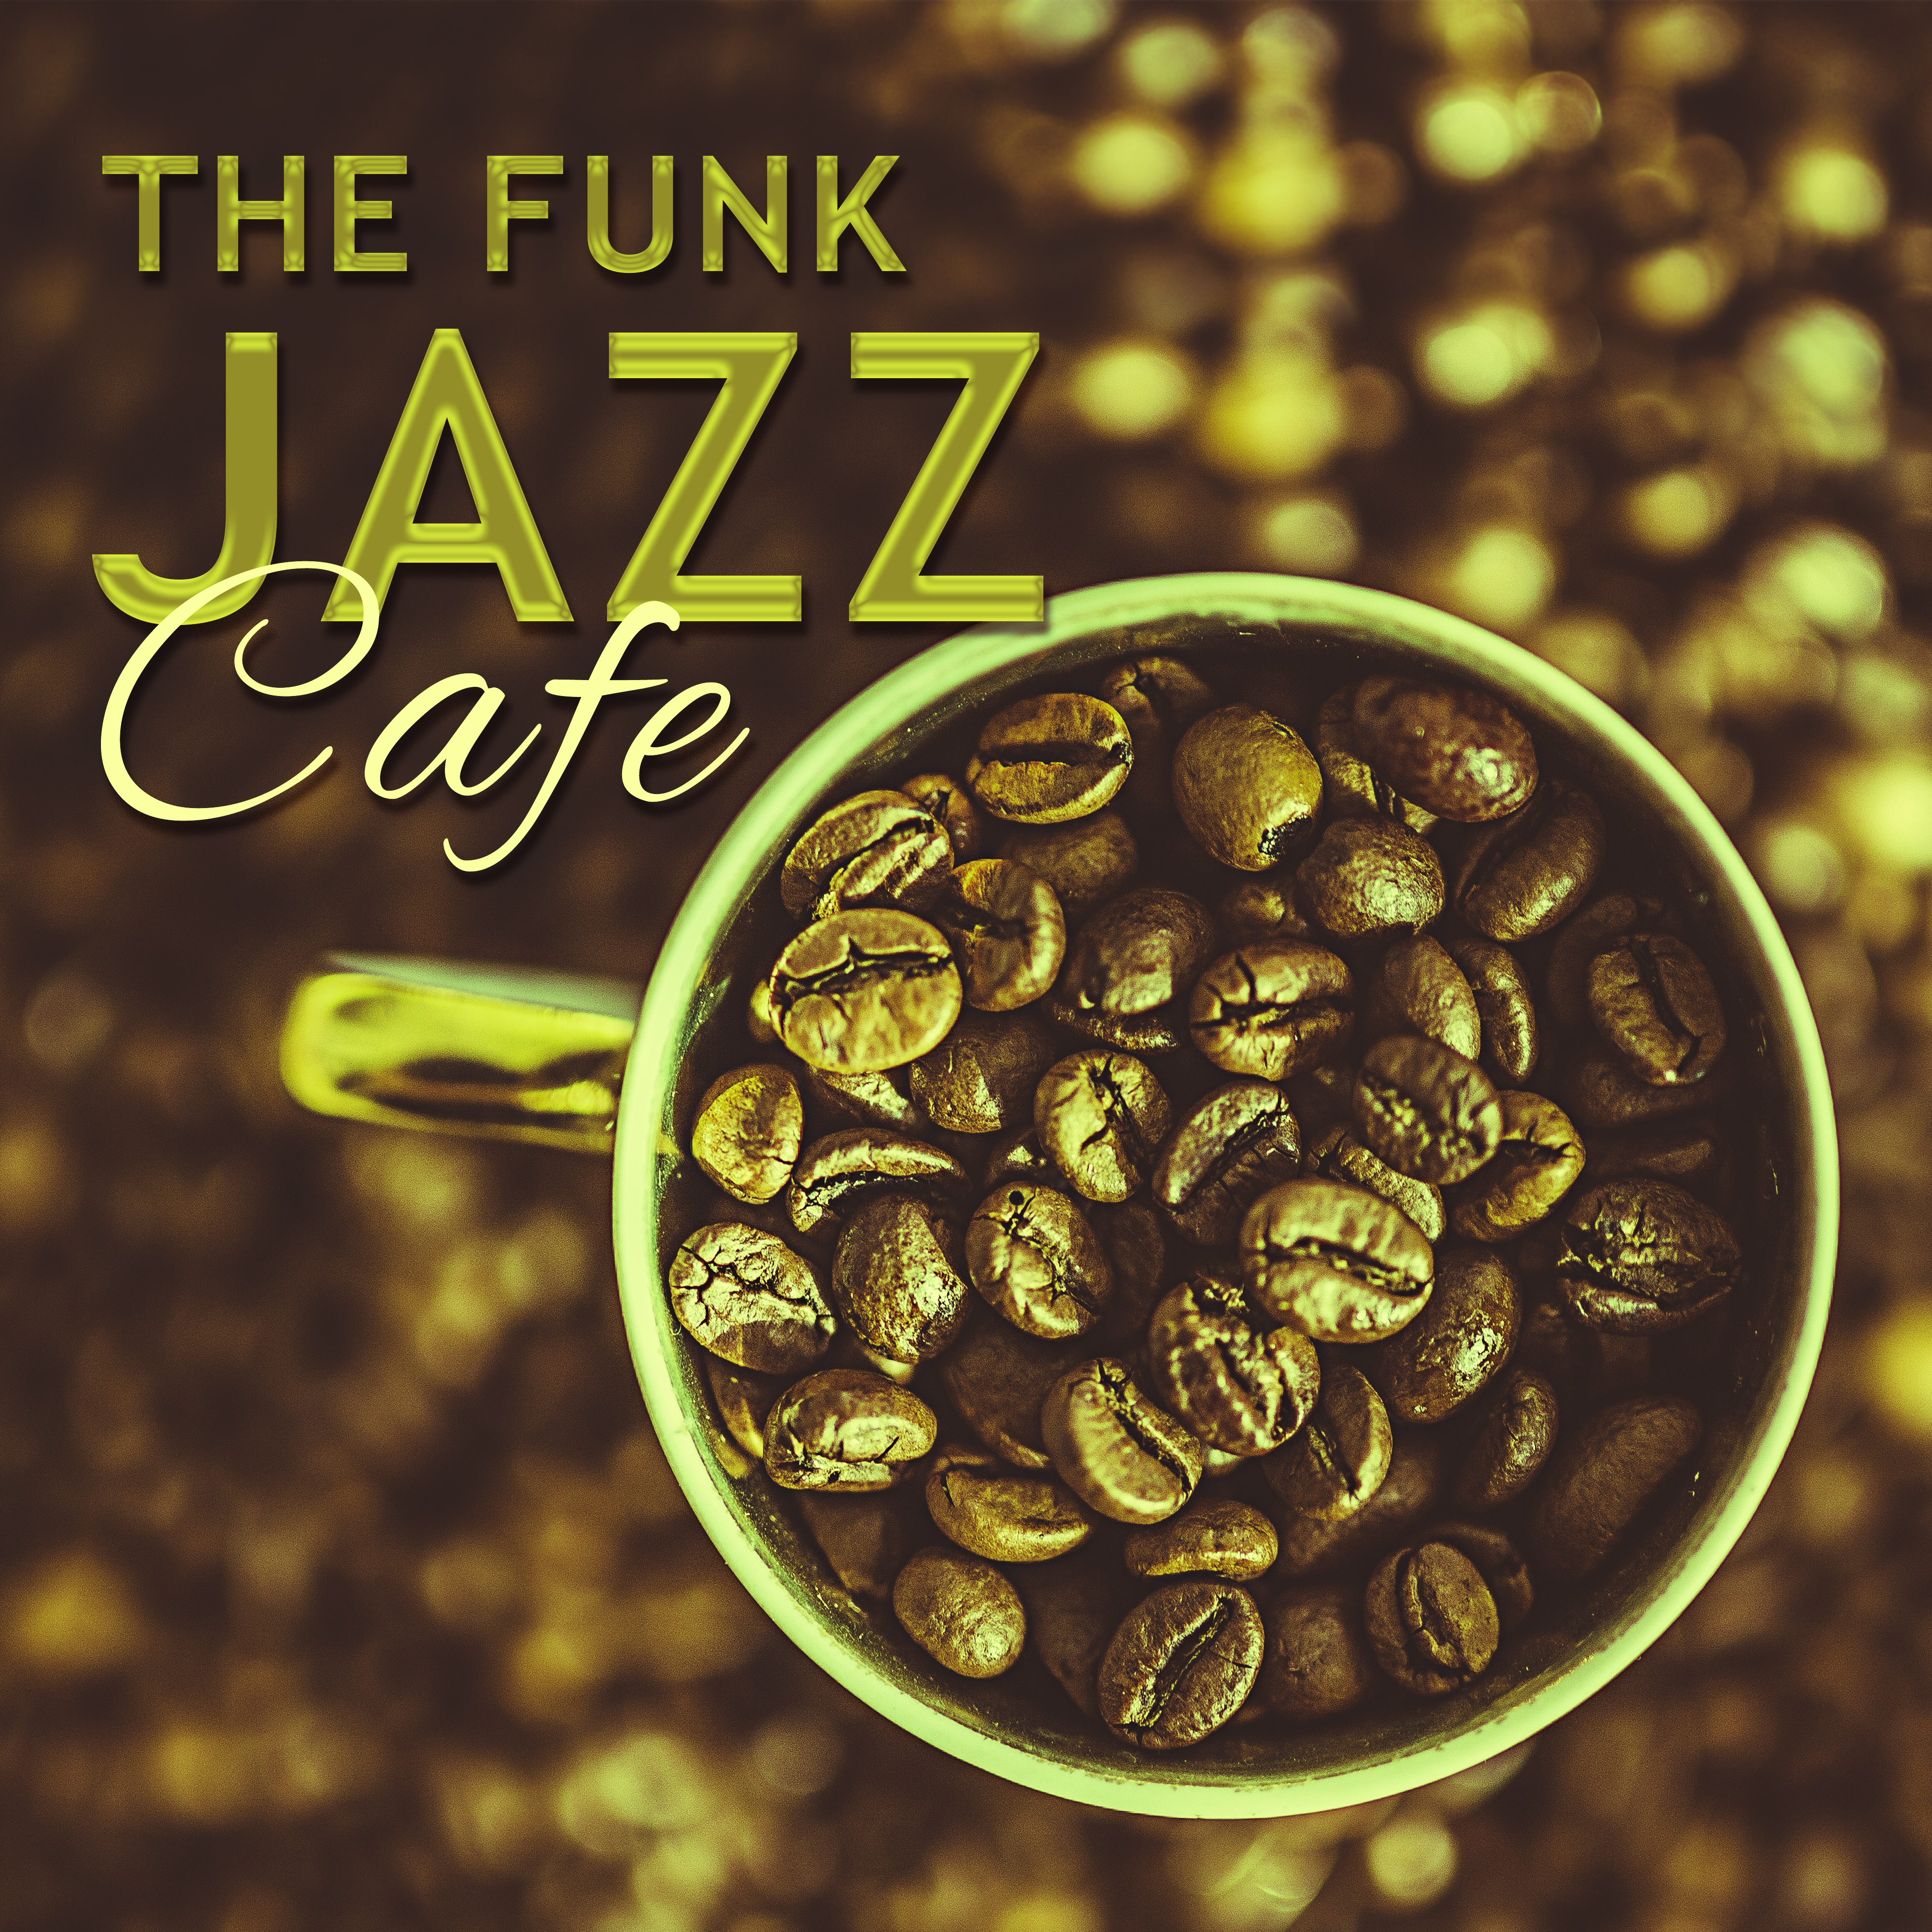 The Funk Jazz Cafe  Instrumental Jazz for Cafe  Restaurant, Relaxing Coffee Talk, Coffee on the Morning